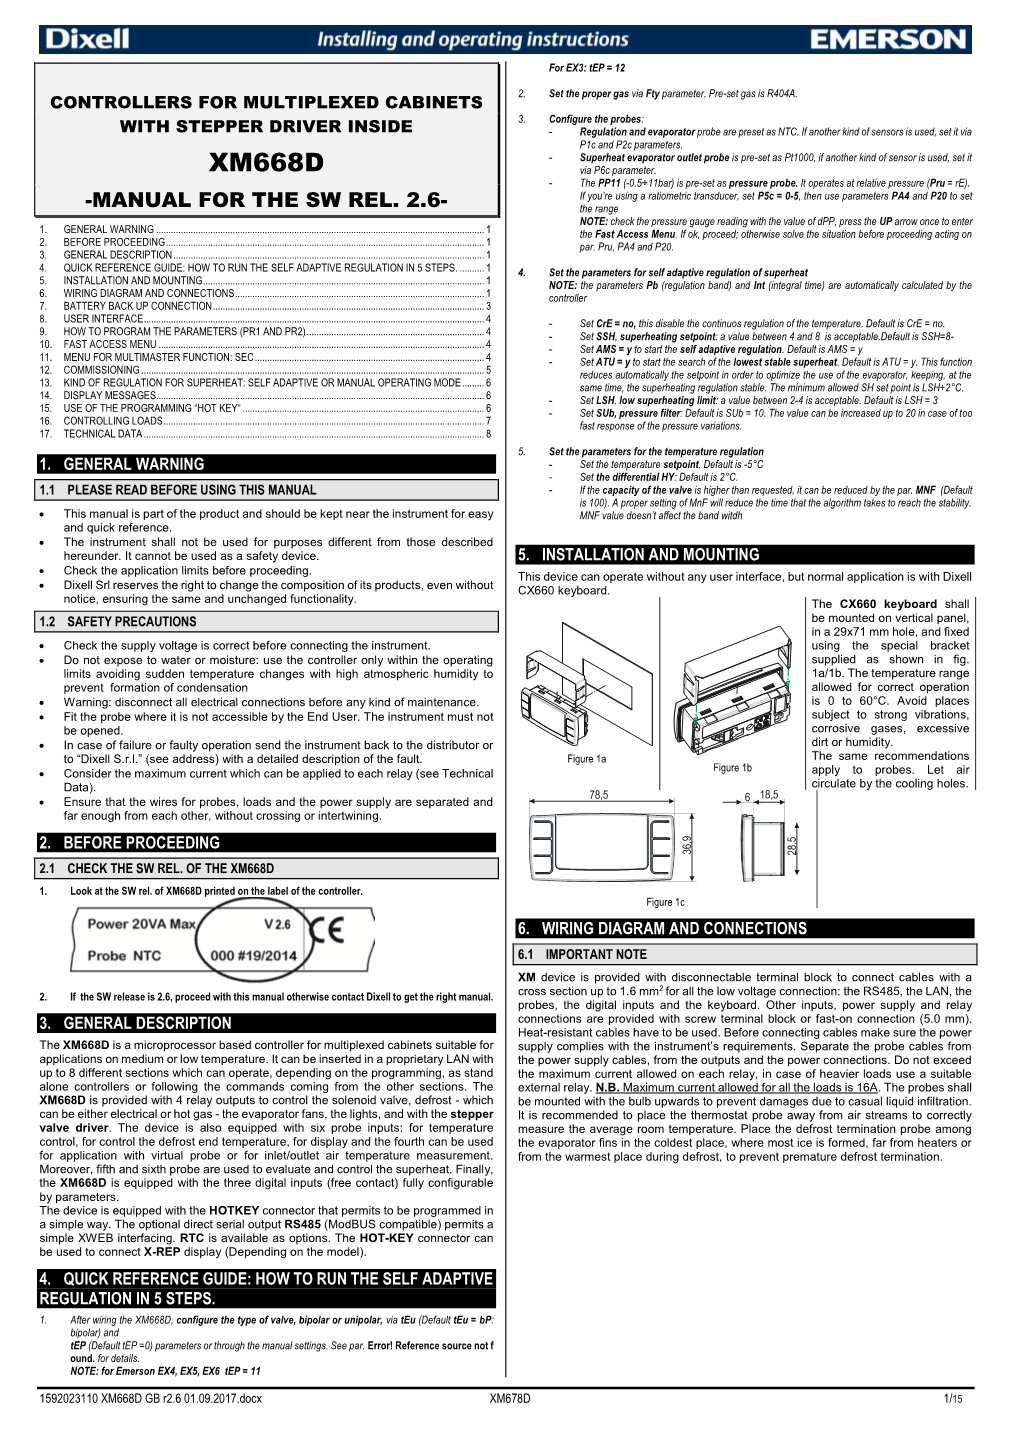 Controllers for Multiplexed Cabinets 3